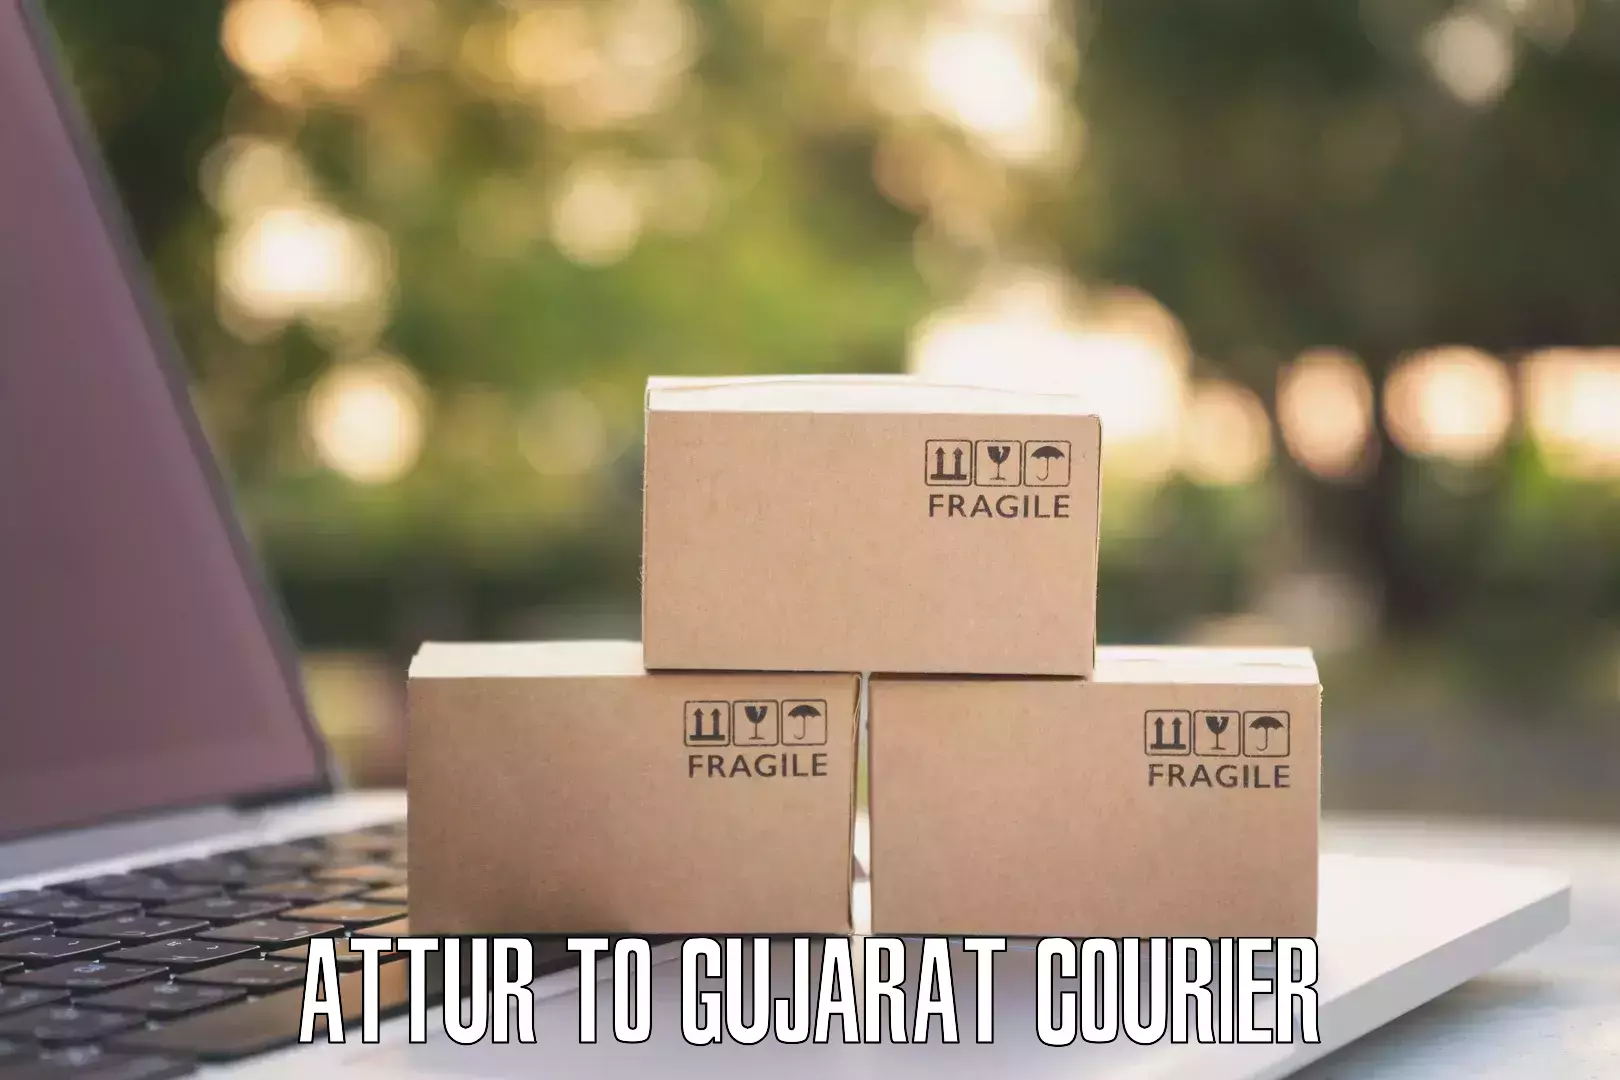 Express delivery solutions Attur to Gujarat